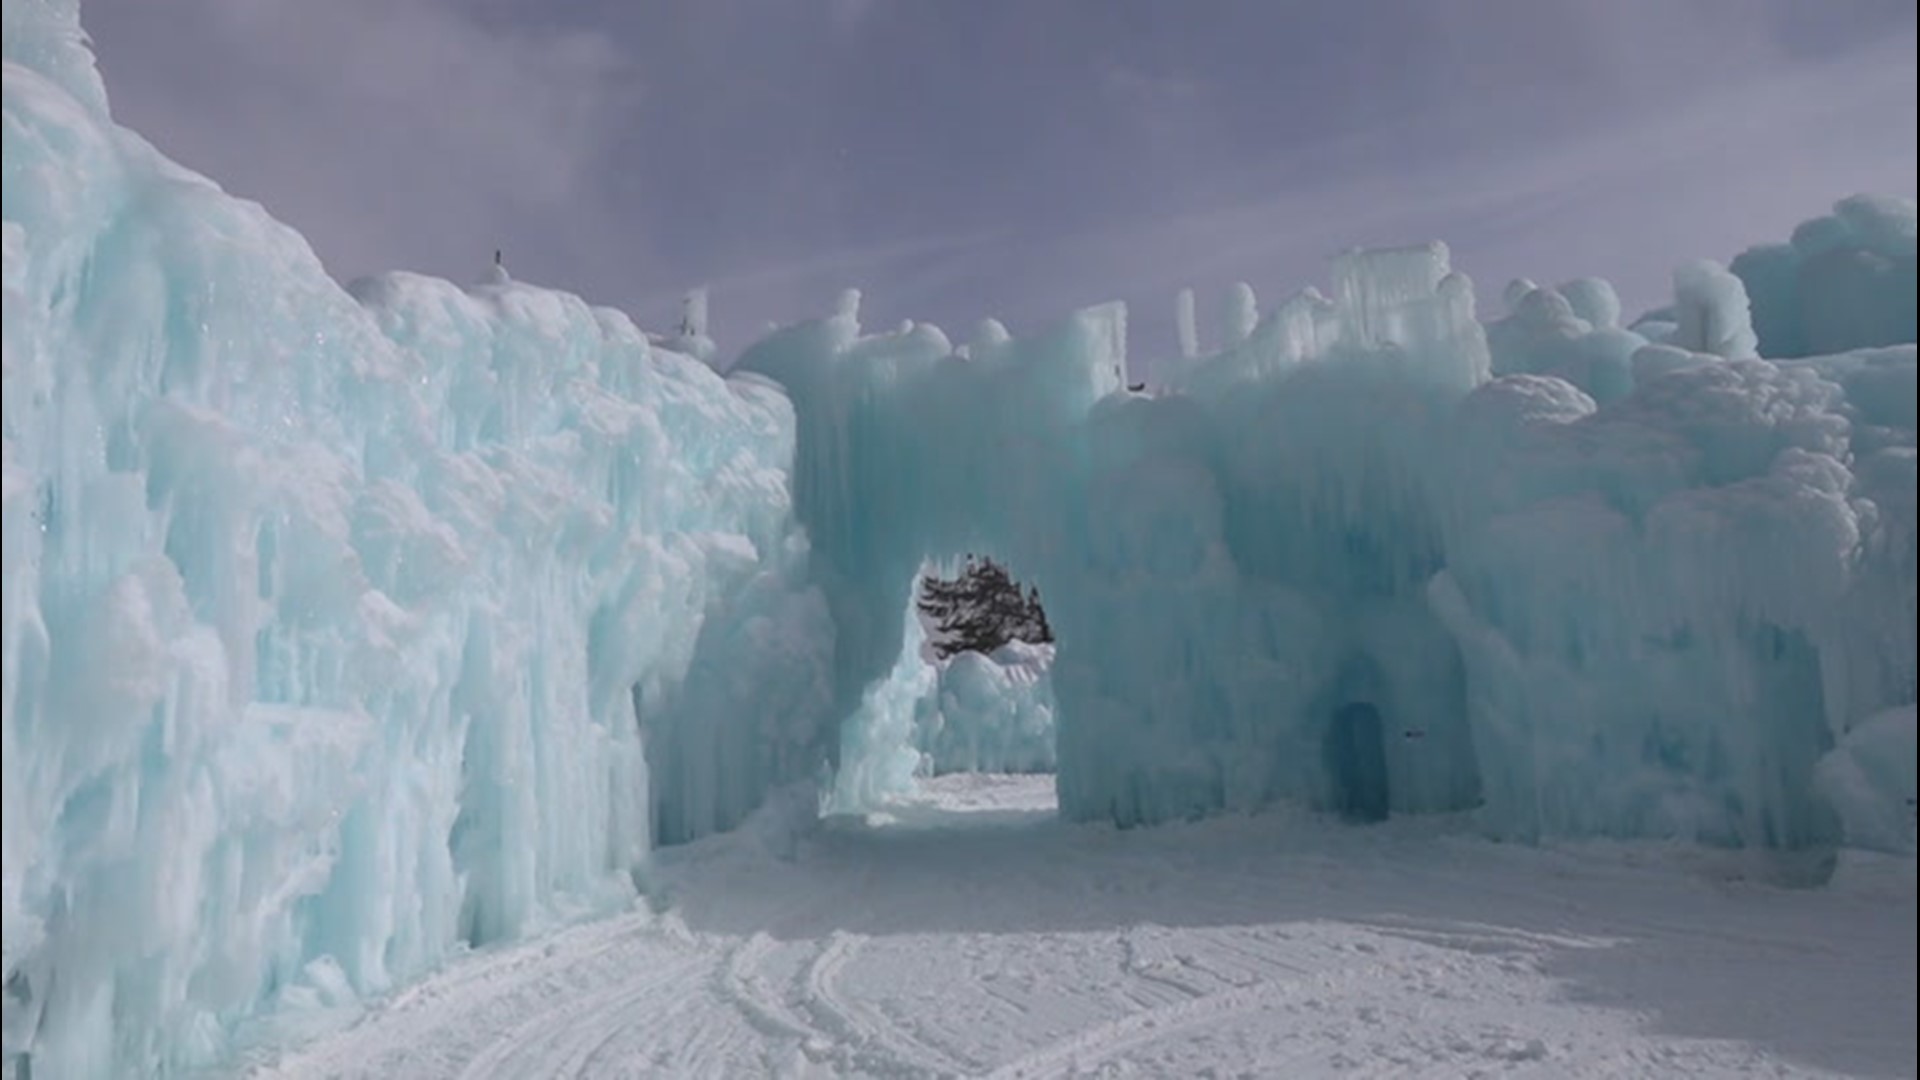 A warmer year makes building the attraction harder for those behind it, but a group of ice castles just west of Denver is drawing huge demand during the COVID-19 pandemic.